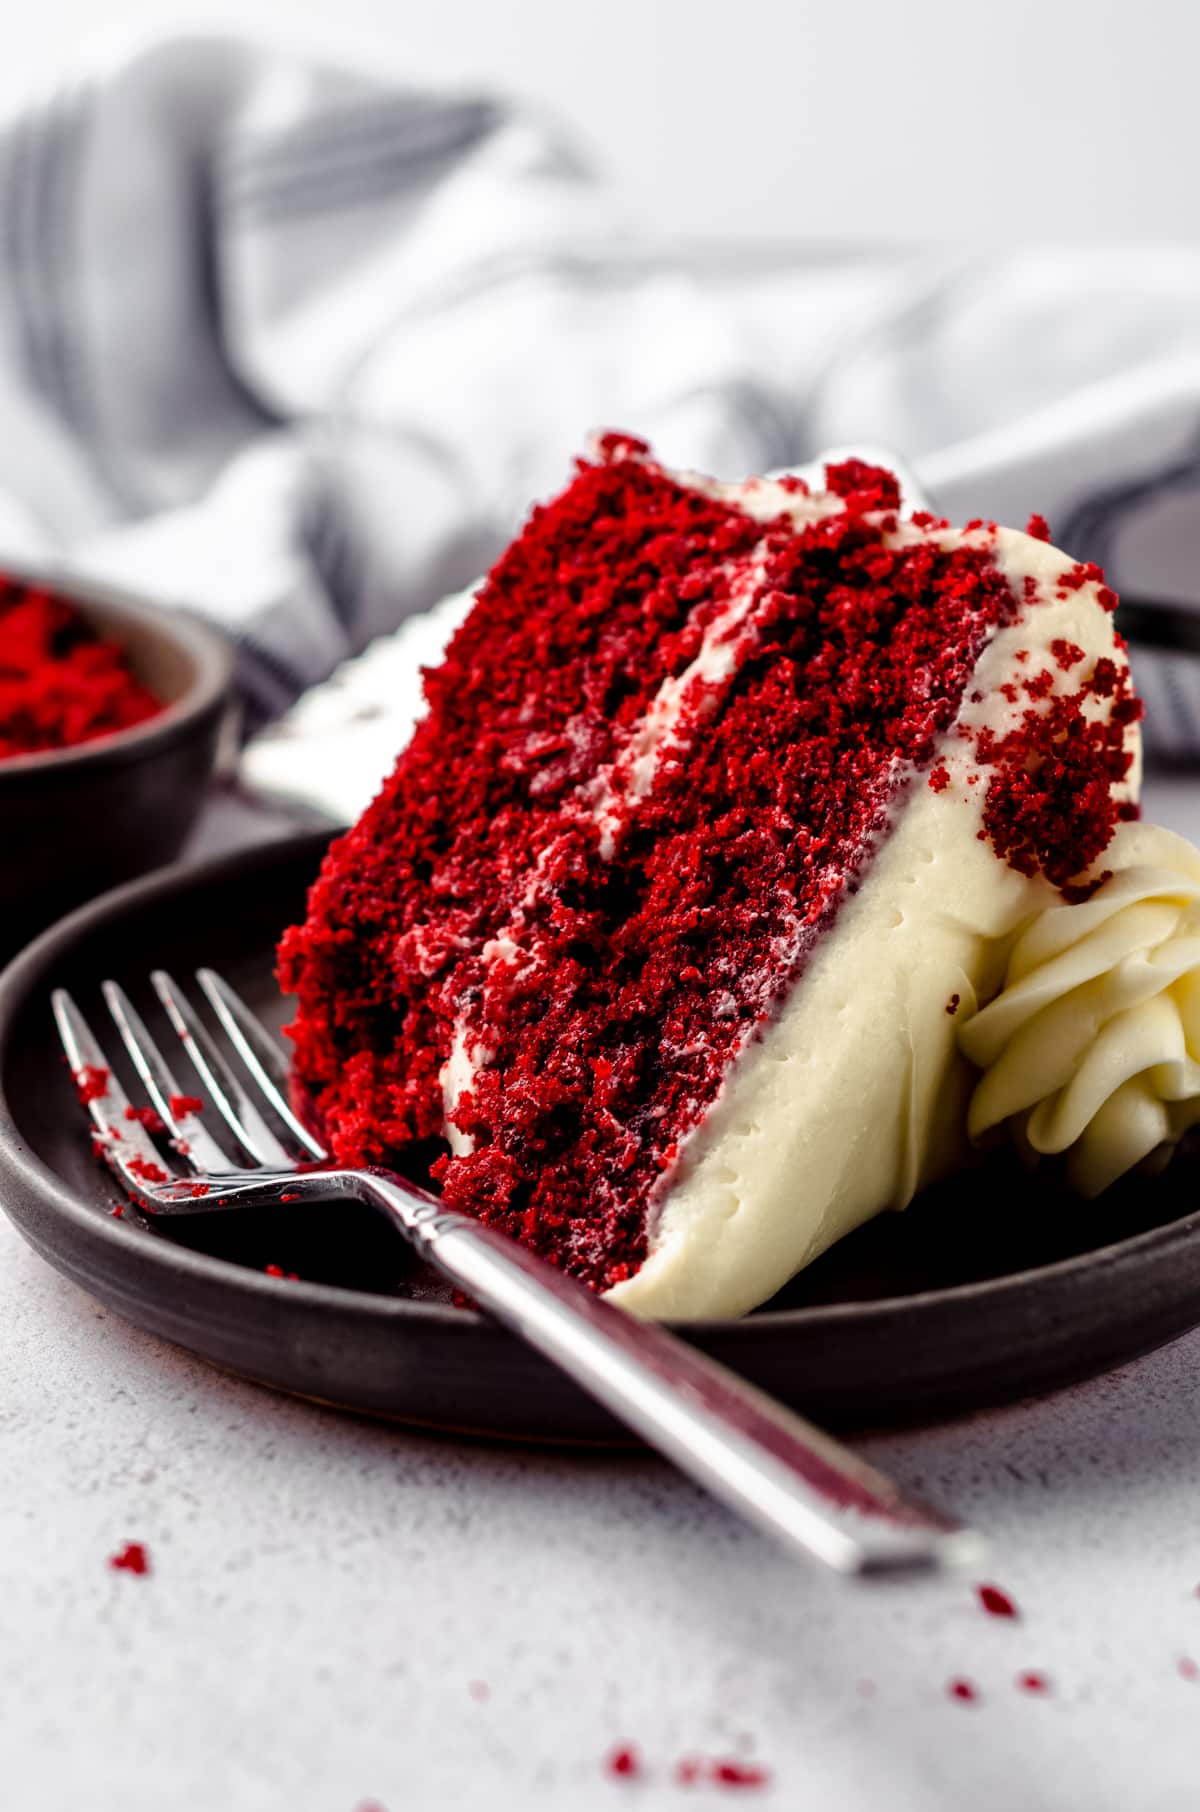 A slice of red velvet cake on a plate with a fork and a bite taken out of it.